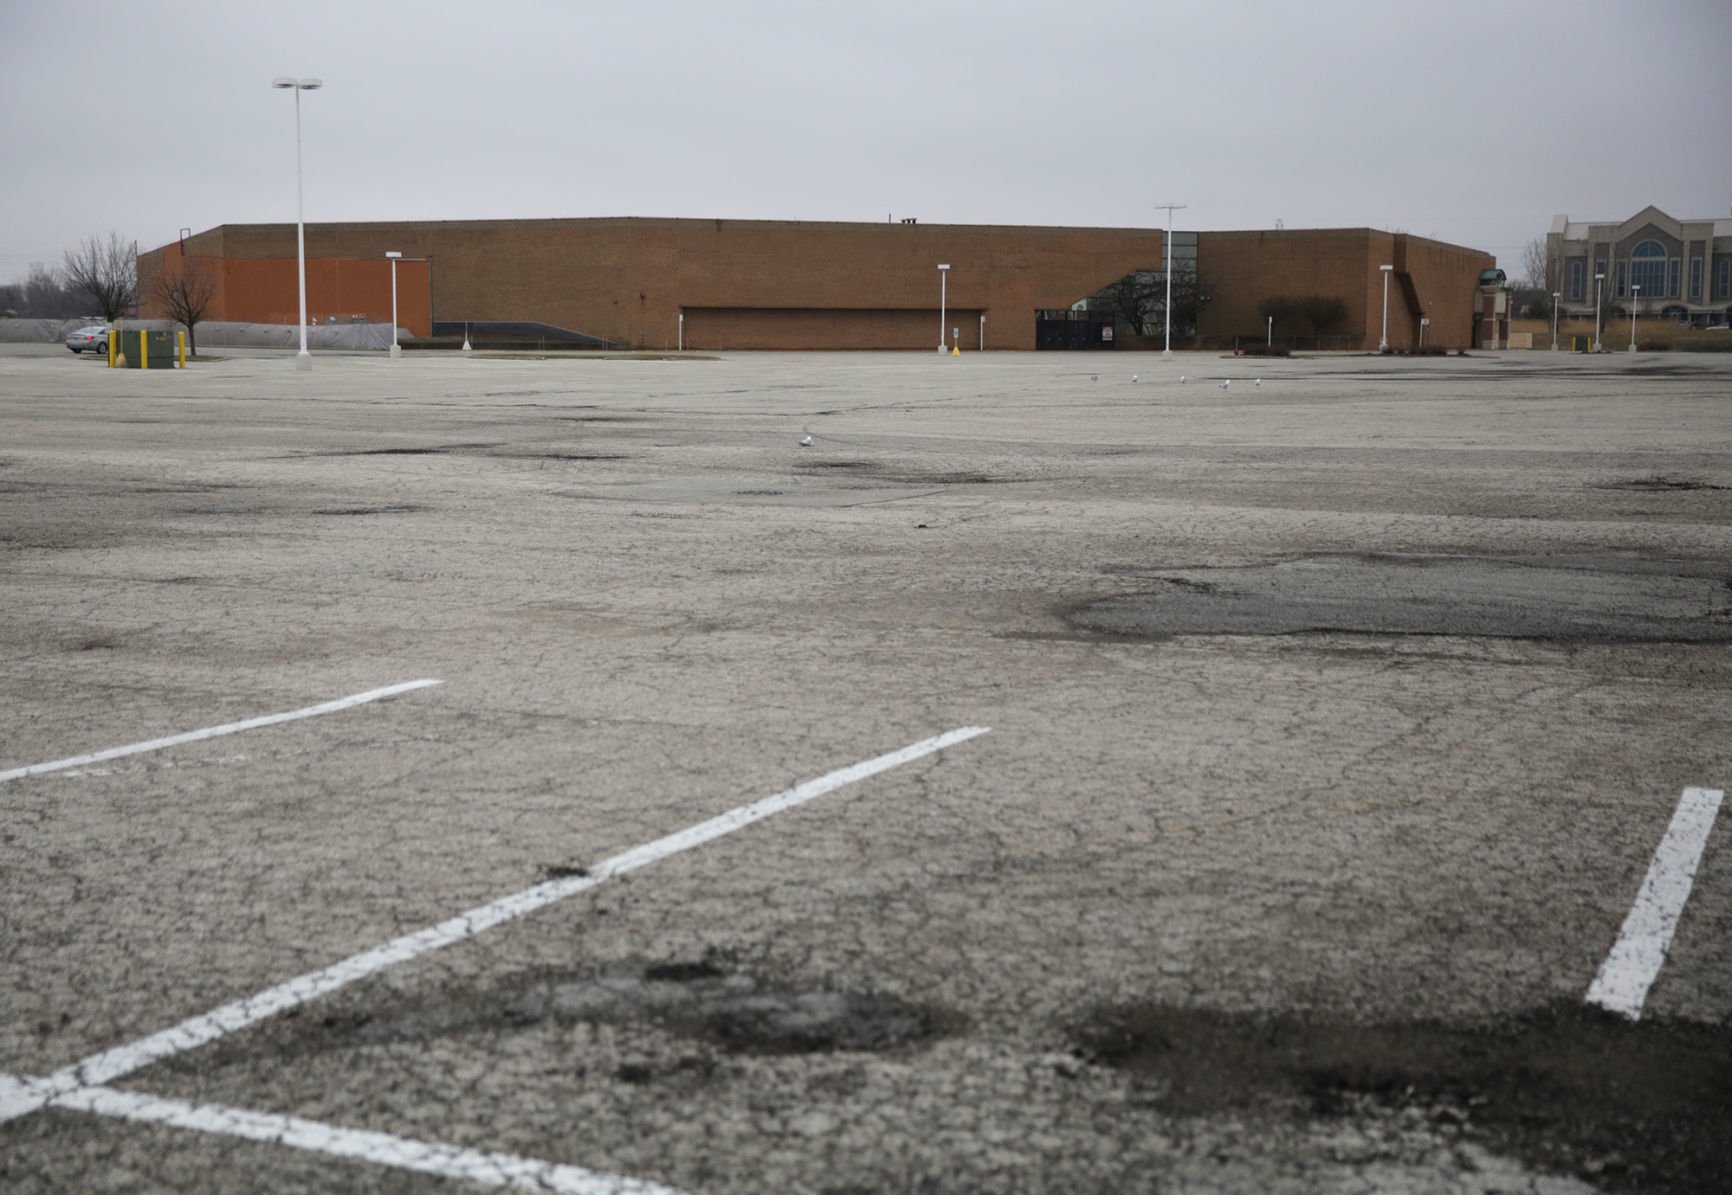 Merrillville exploring food and beverage tax as way to fund commercial development pic